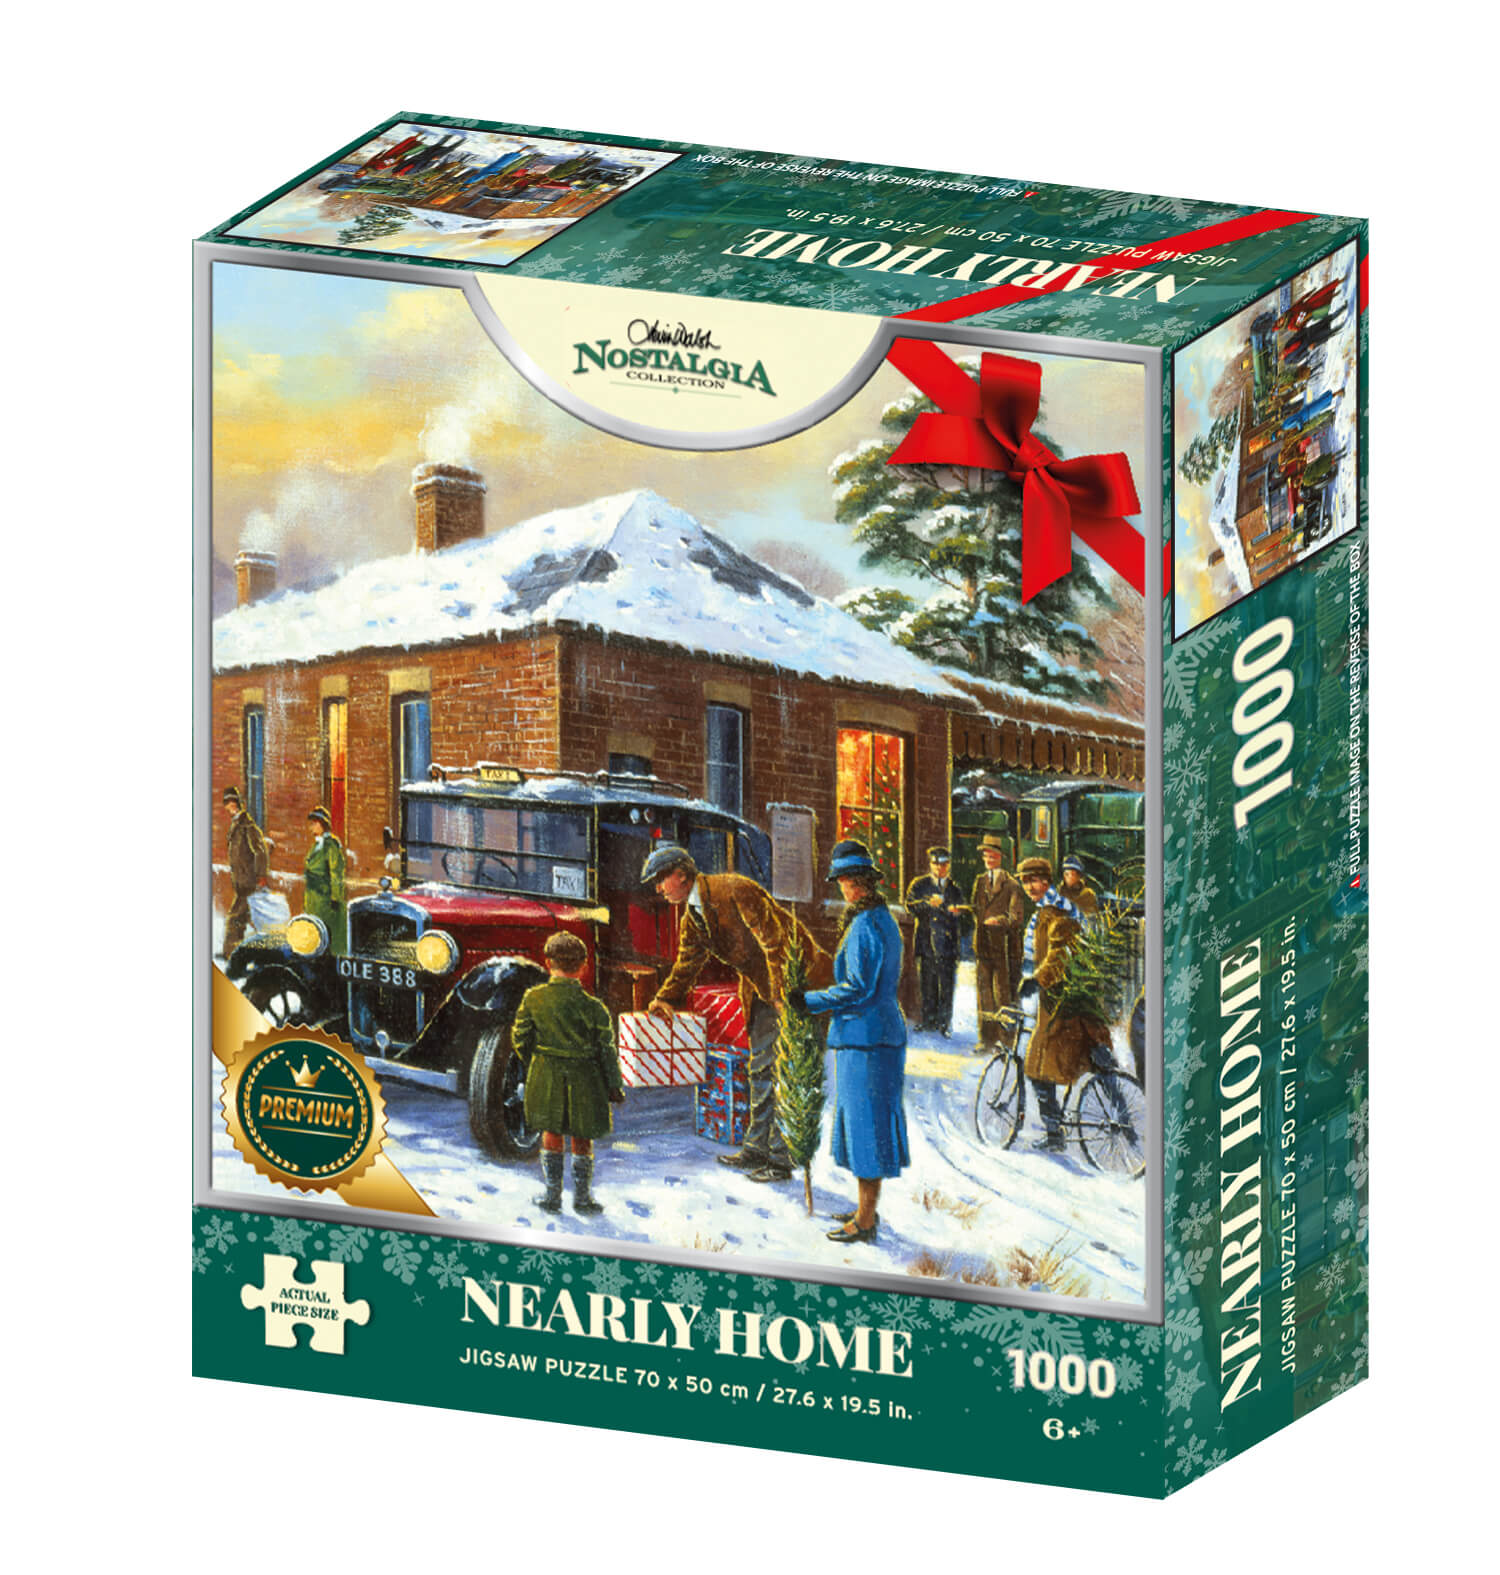 Nearly Home 1000 piece Jigsaw Puzzle - Chester Model Centre